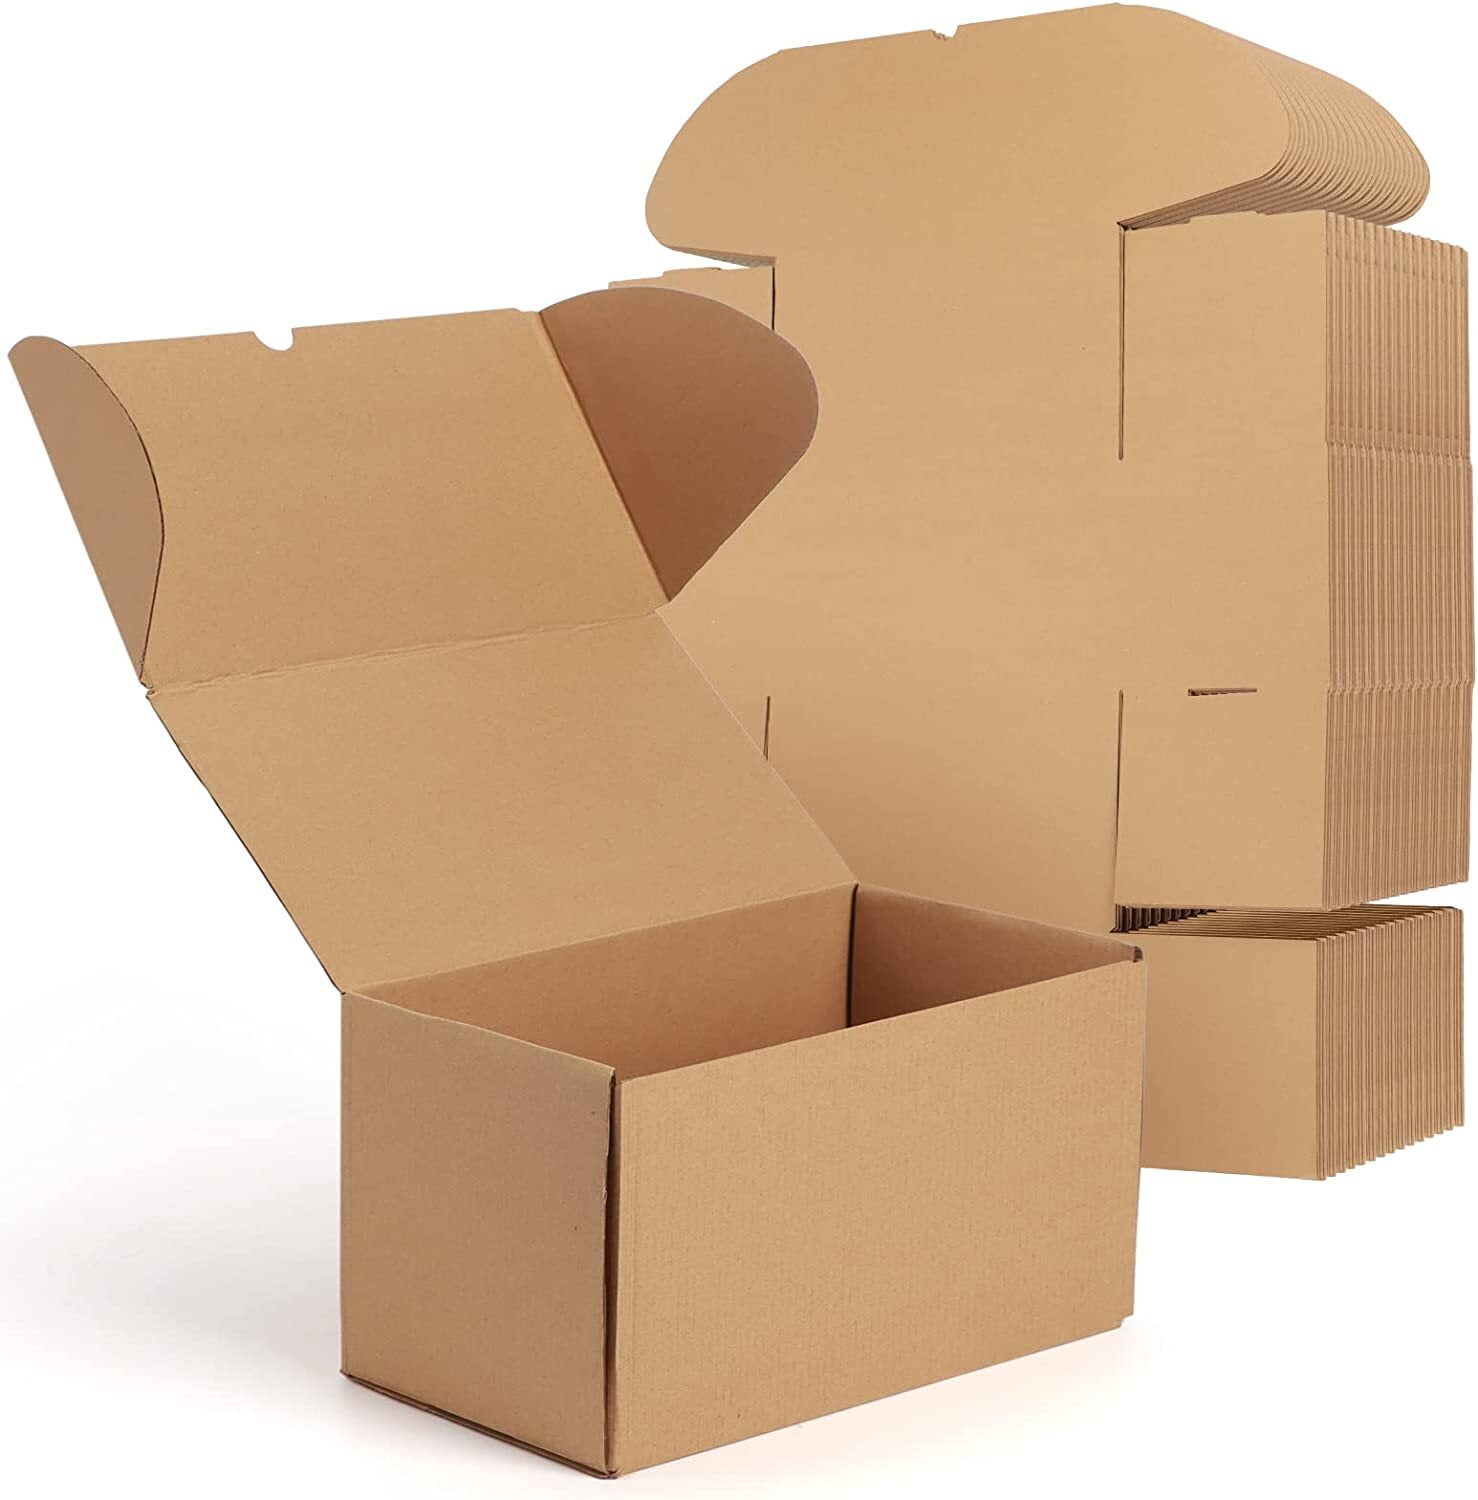 Tuck Mailer Boxes